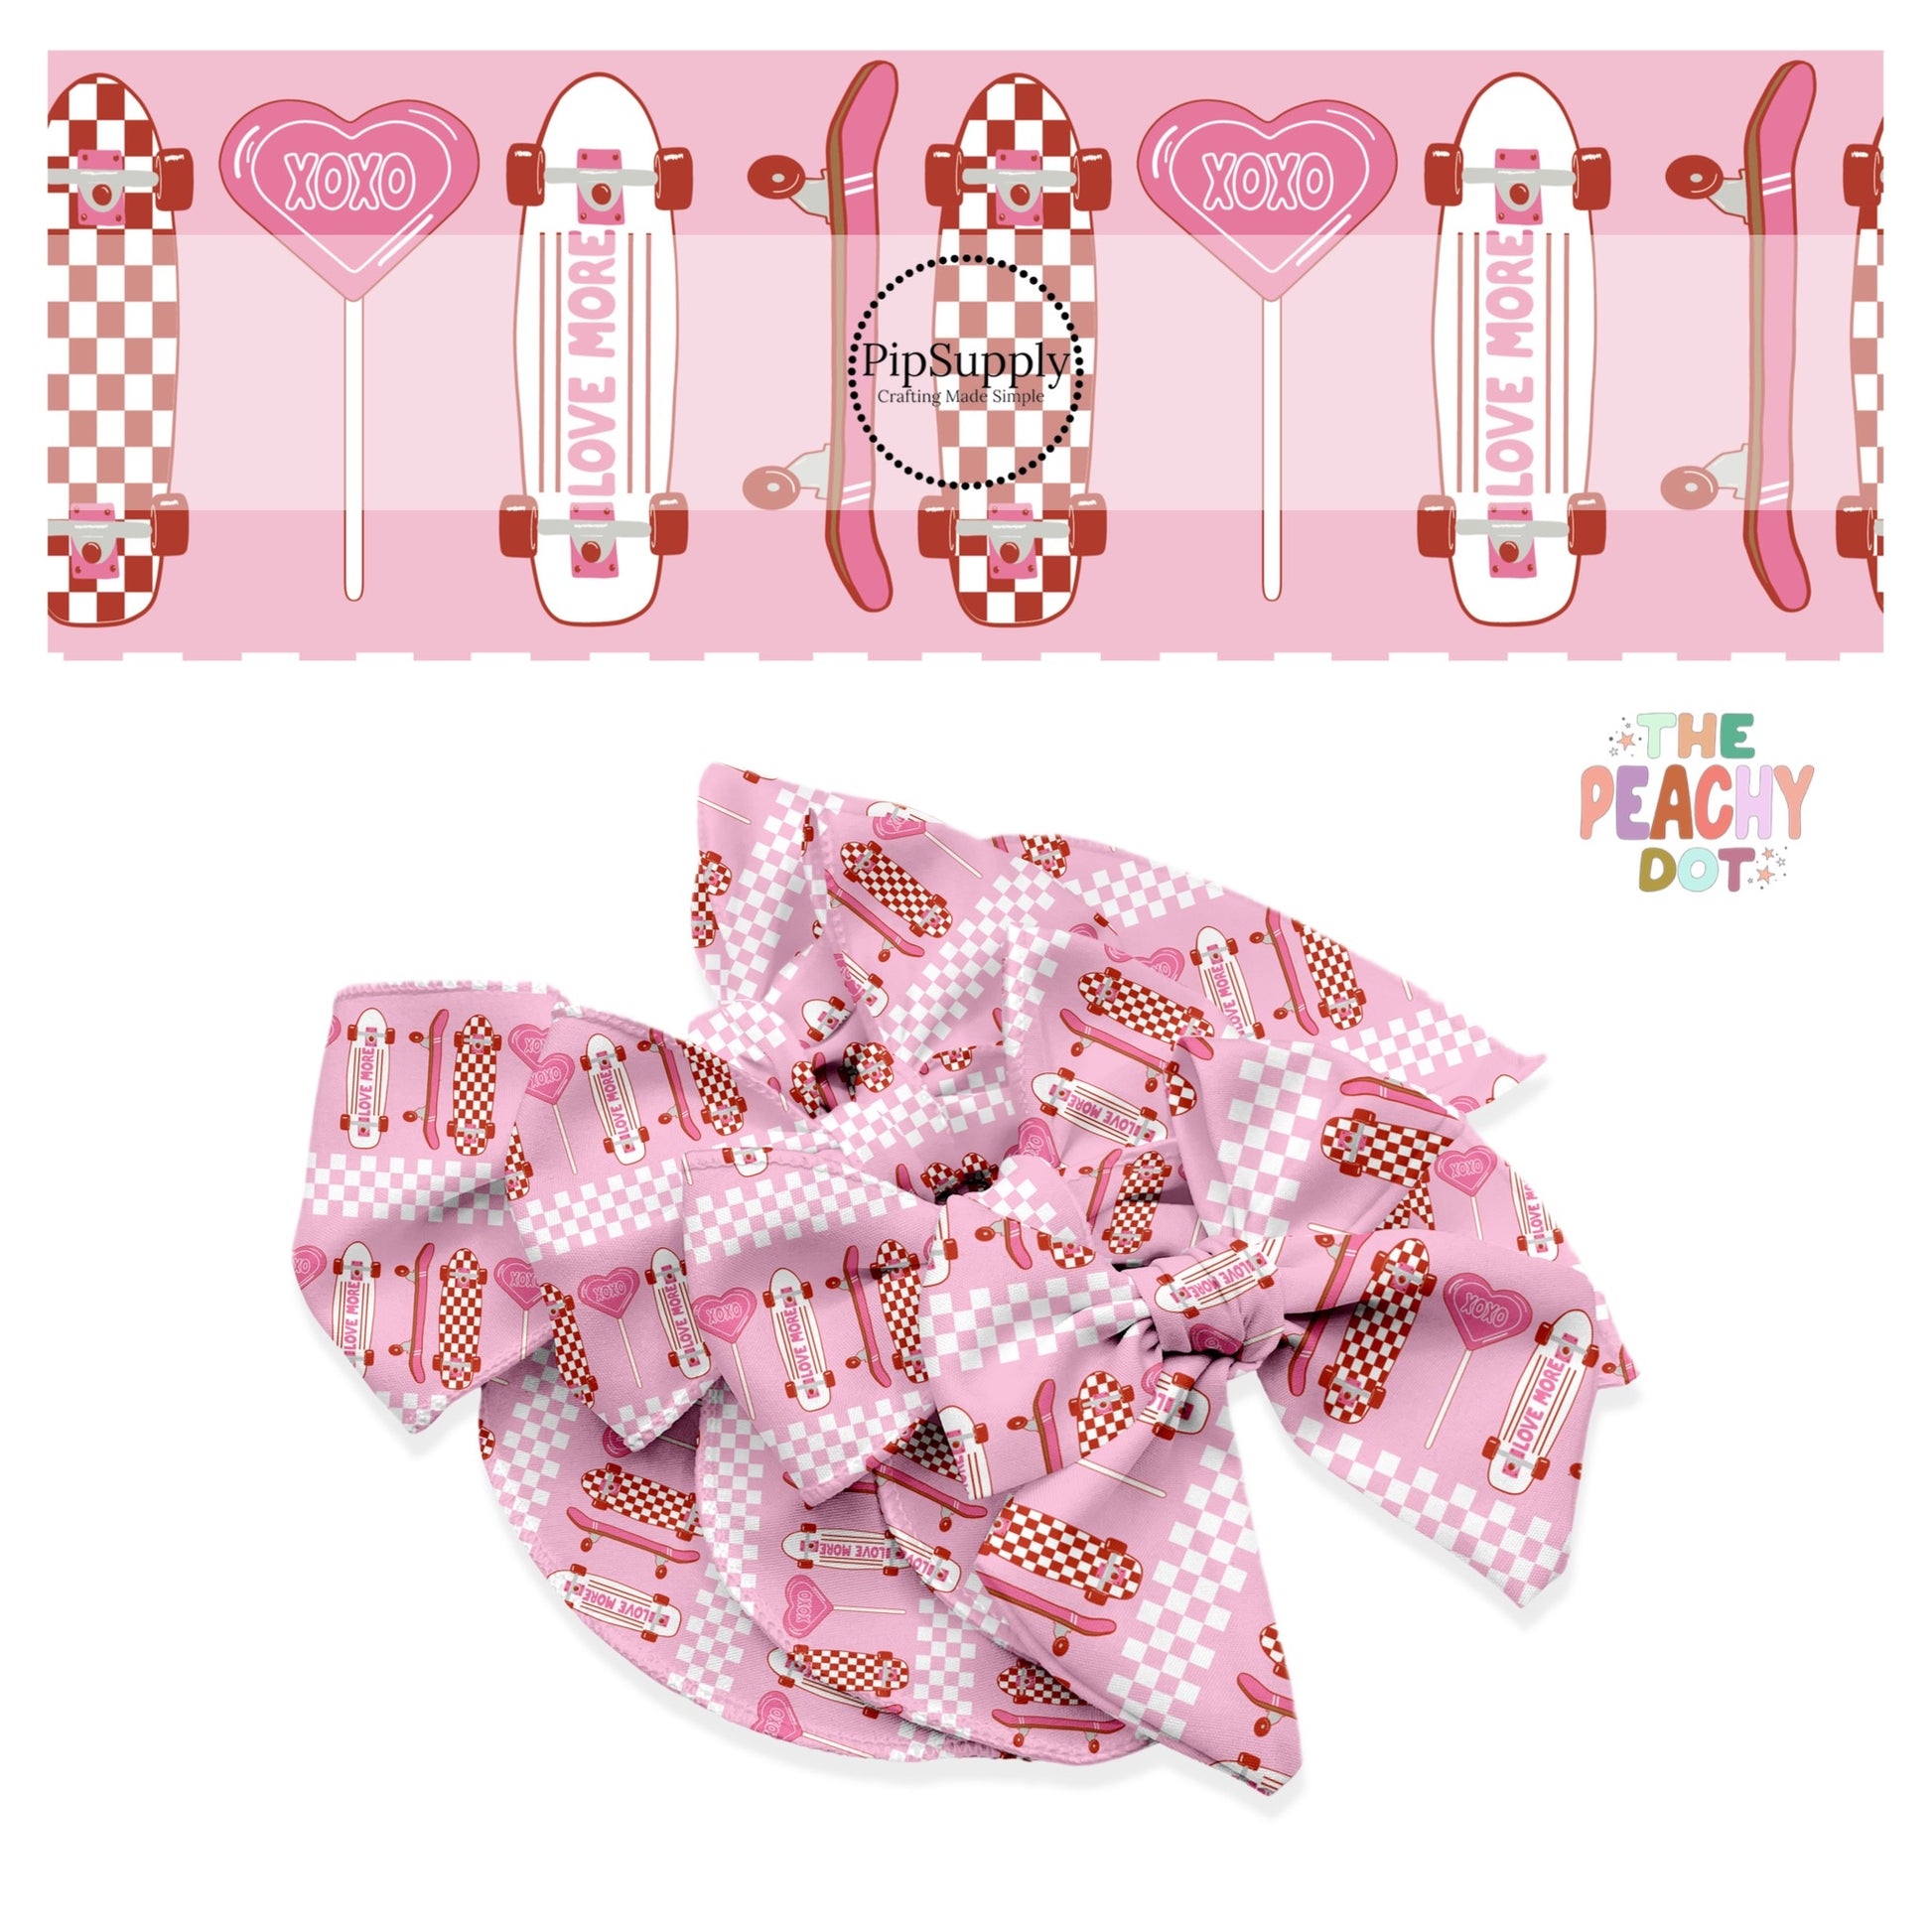 Vertical checkered skateboards on pink bow strips